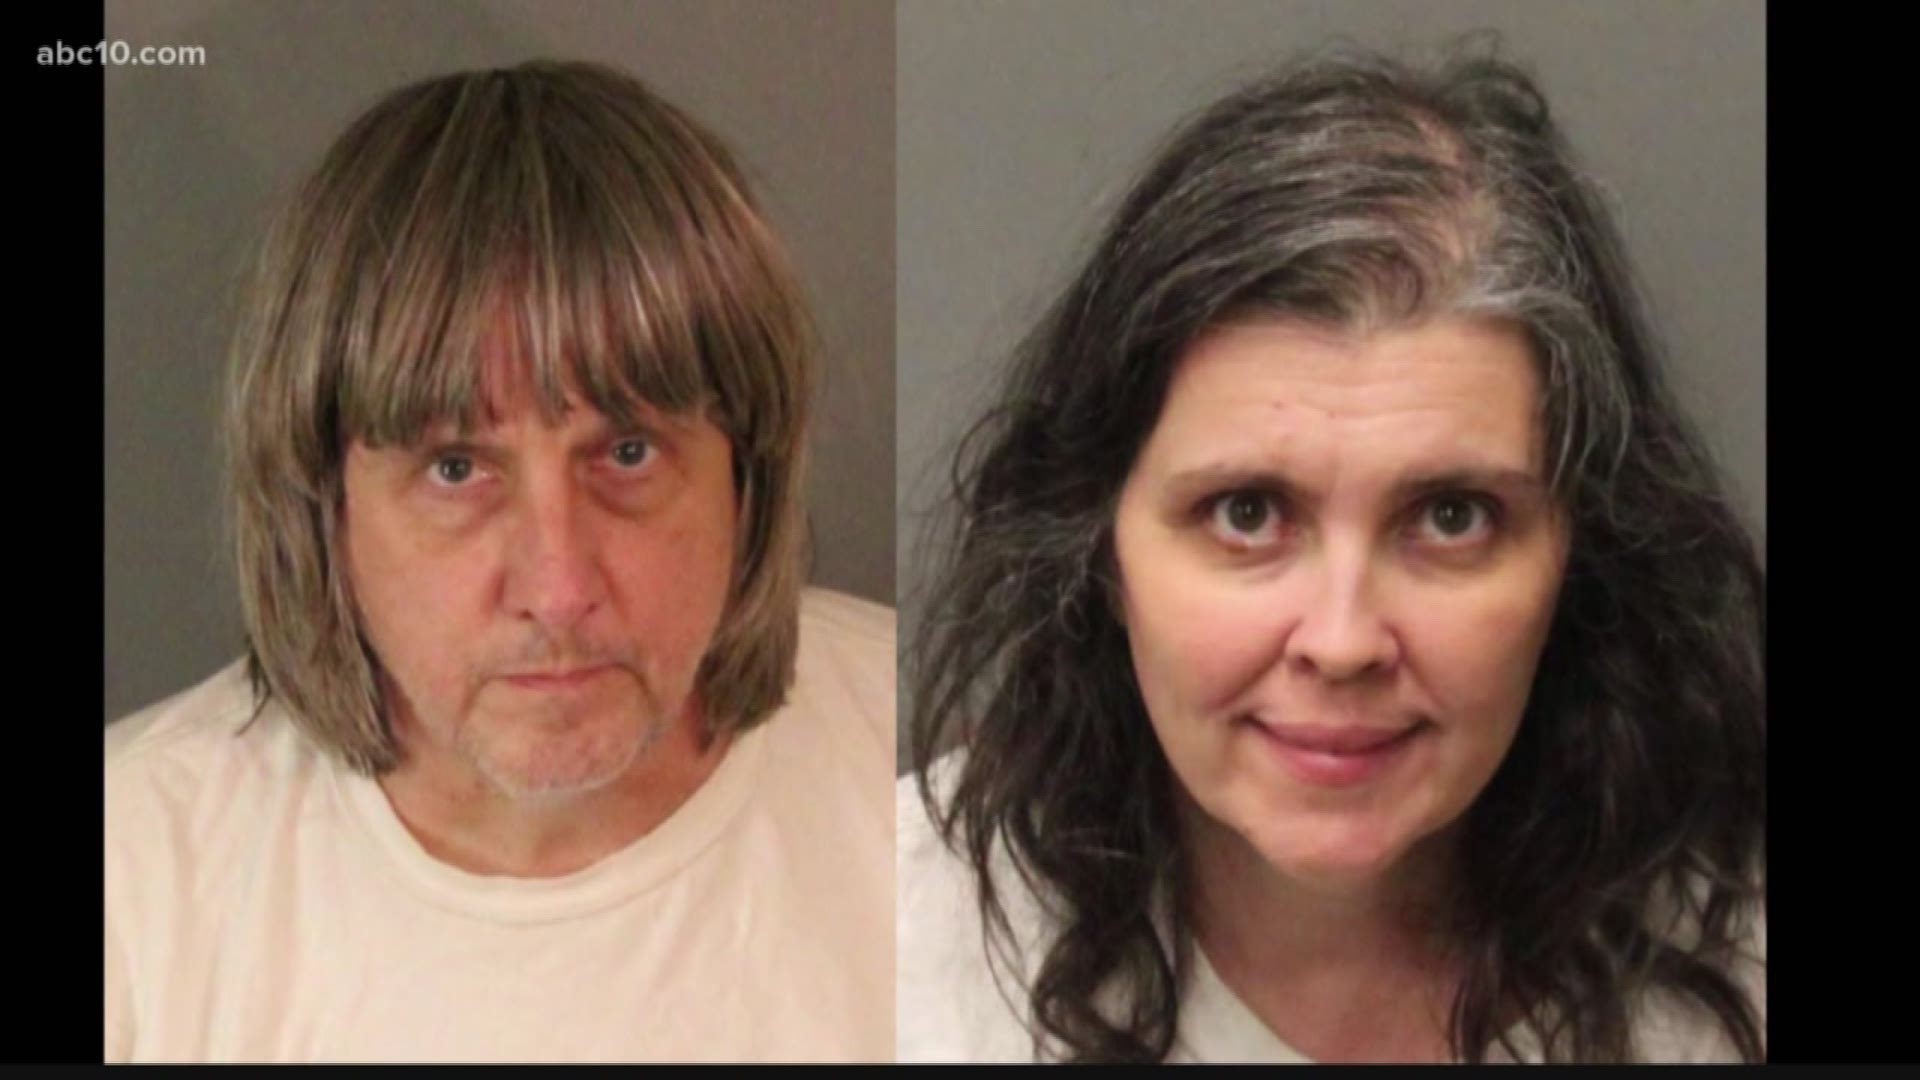 Two parents were arrested Sunday after their 17-year-old daughter led deputies to a home where her 12 brothers and sisters were locked away in filthy conditions, malnourished and chained to beds, sheriffs officials said.